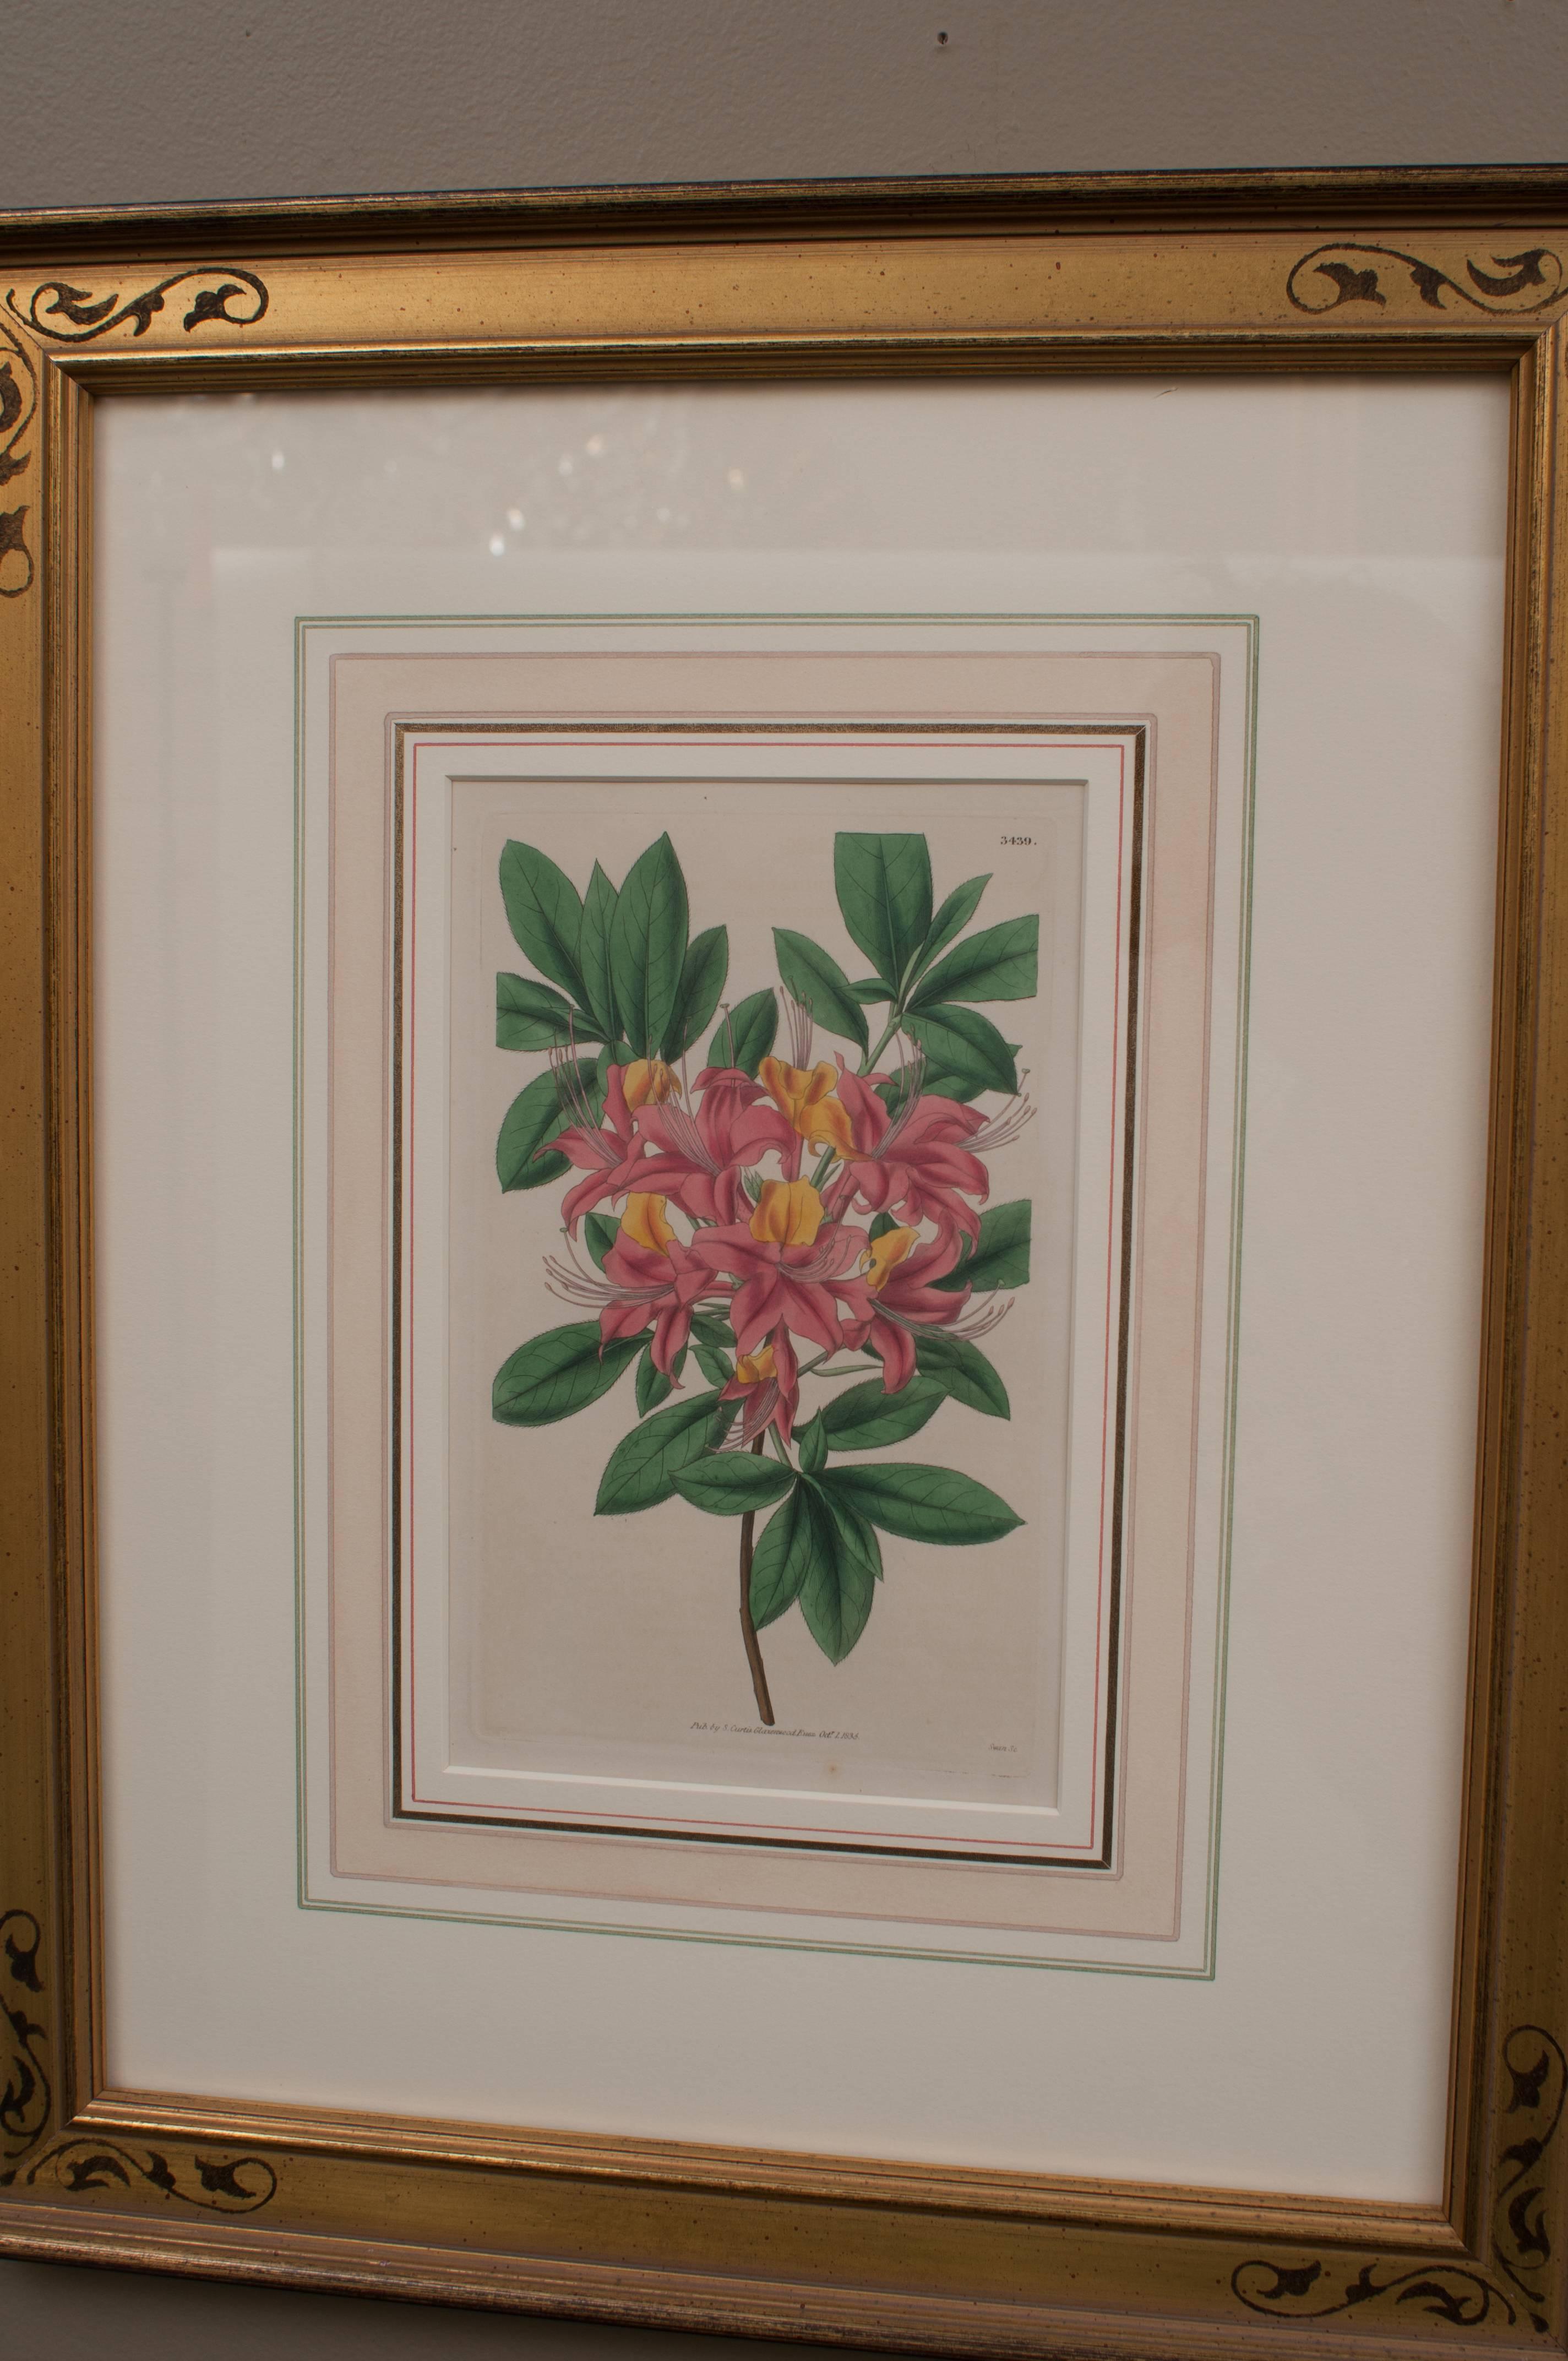 English Pair of Hand-Colored Floral Engravings For Sale